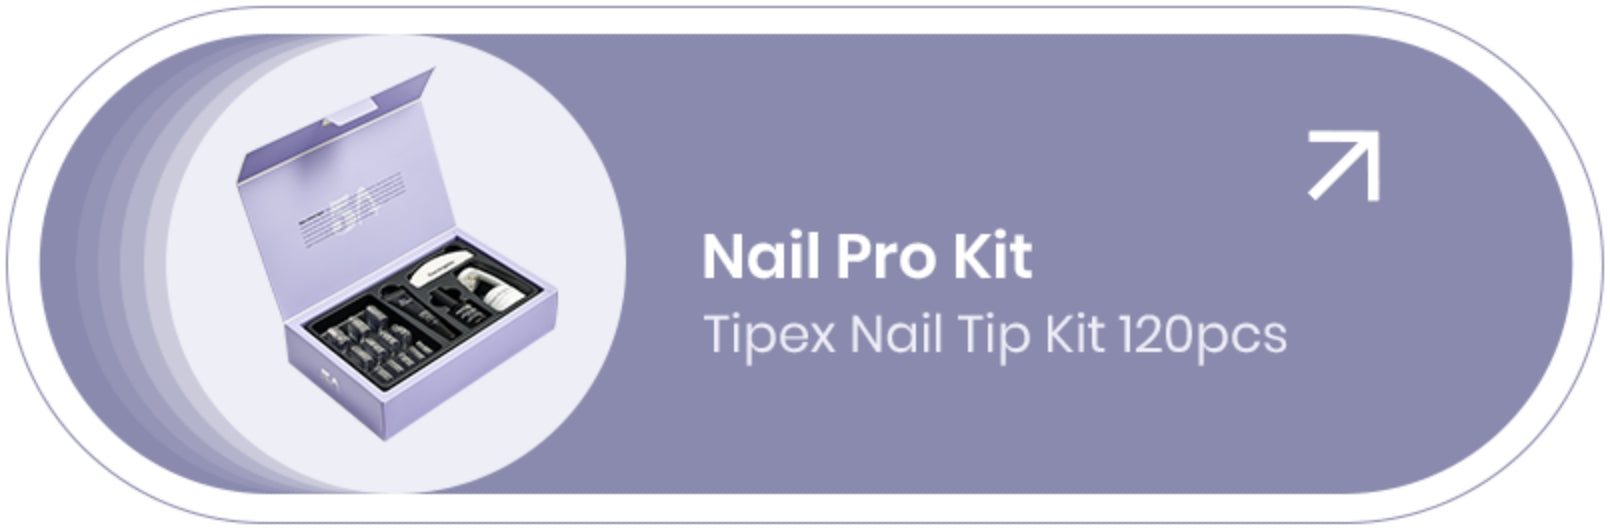 Tipex Instant Apex Pre-Sculpted Acrylic Nail Tips Kit - 120pcs + Nail –  Five Angeles